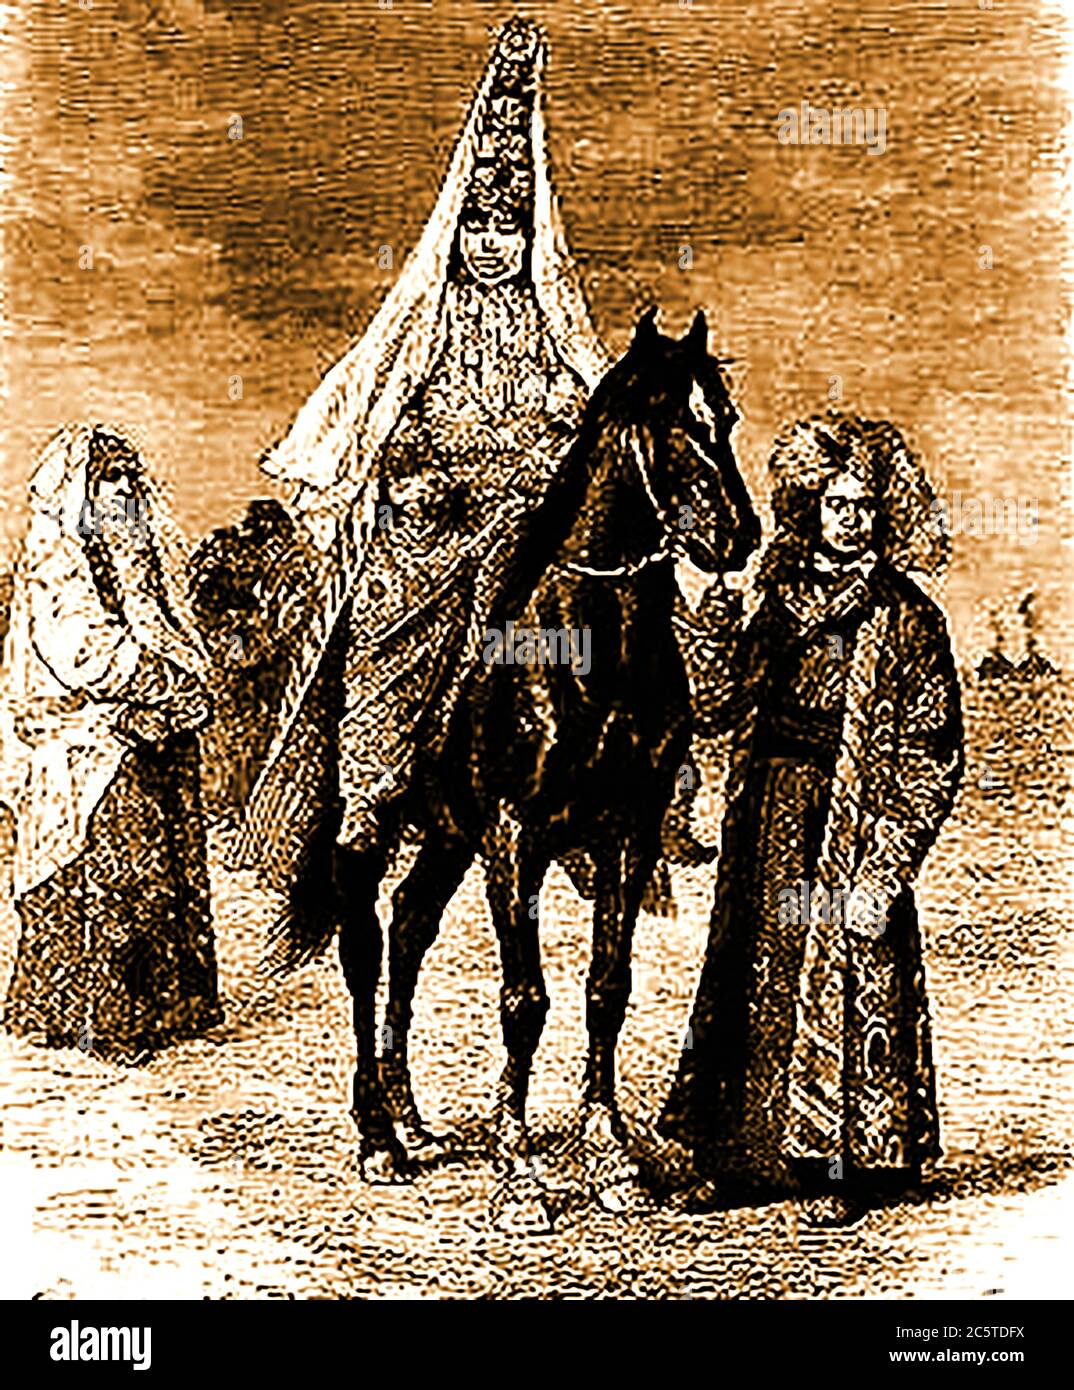 An 1880 illustration from the 'Illustrated Missionary News'. The magazine was formerly published under the title  The Pictorial missionary news edited by Henry Grattan Guinness (1835  - 1910) who was an Irish Protestant Christian preacher, evangelist and author (and others). This picture shows a Russian Tartary (Siberian) Bride riding to her wedding. Stock Photo